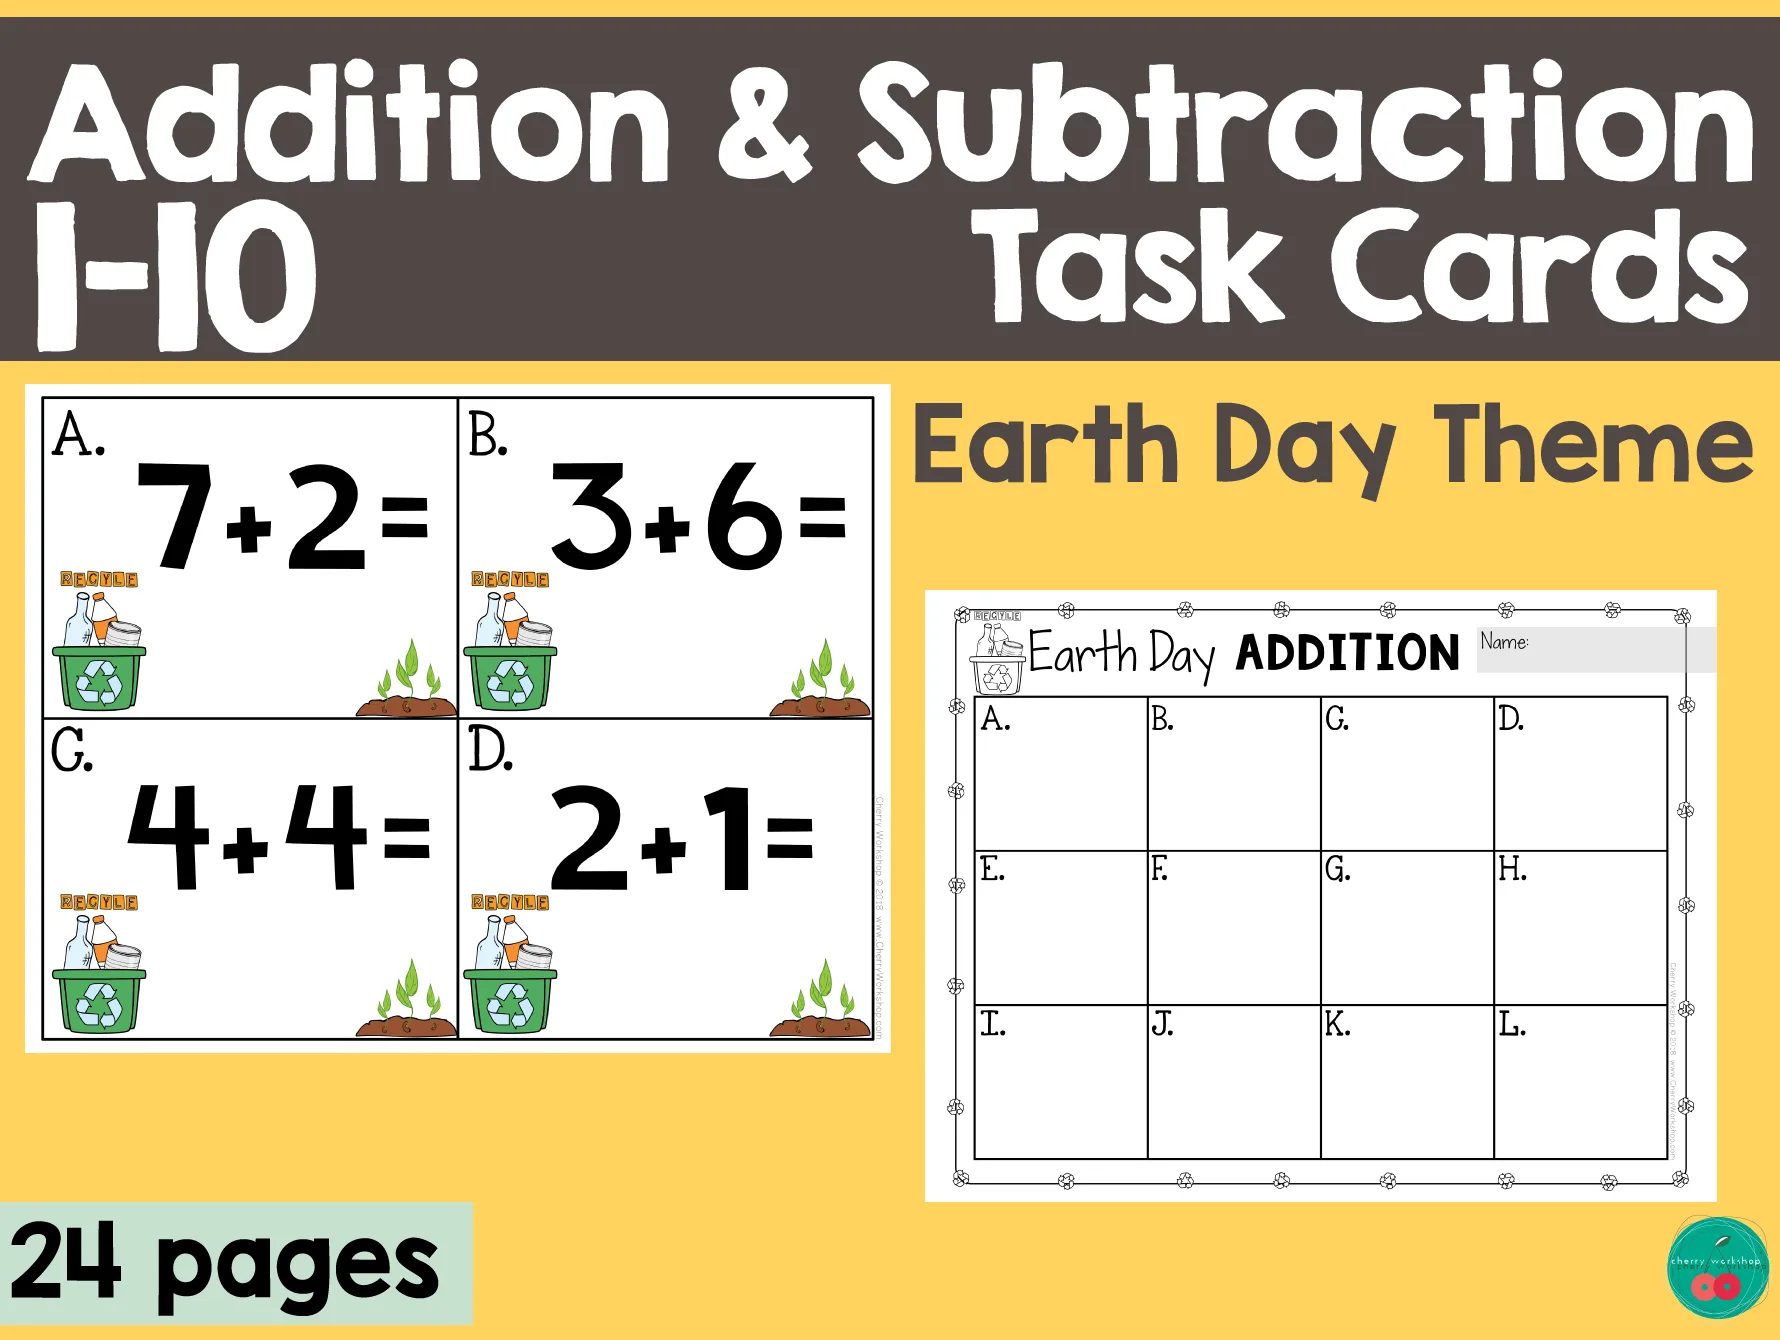 An educational teaching resource from Cherry Workshop entitled Earth Day Addition & Subtraction Task Cards downloadable at Teach Simple.